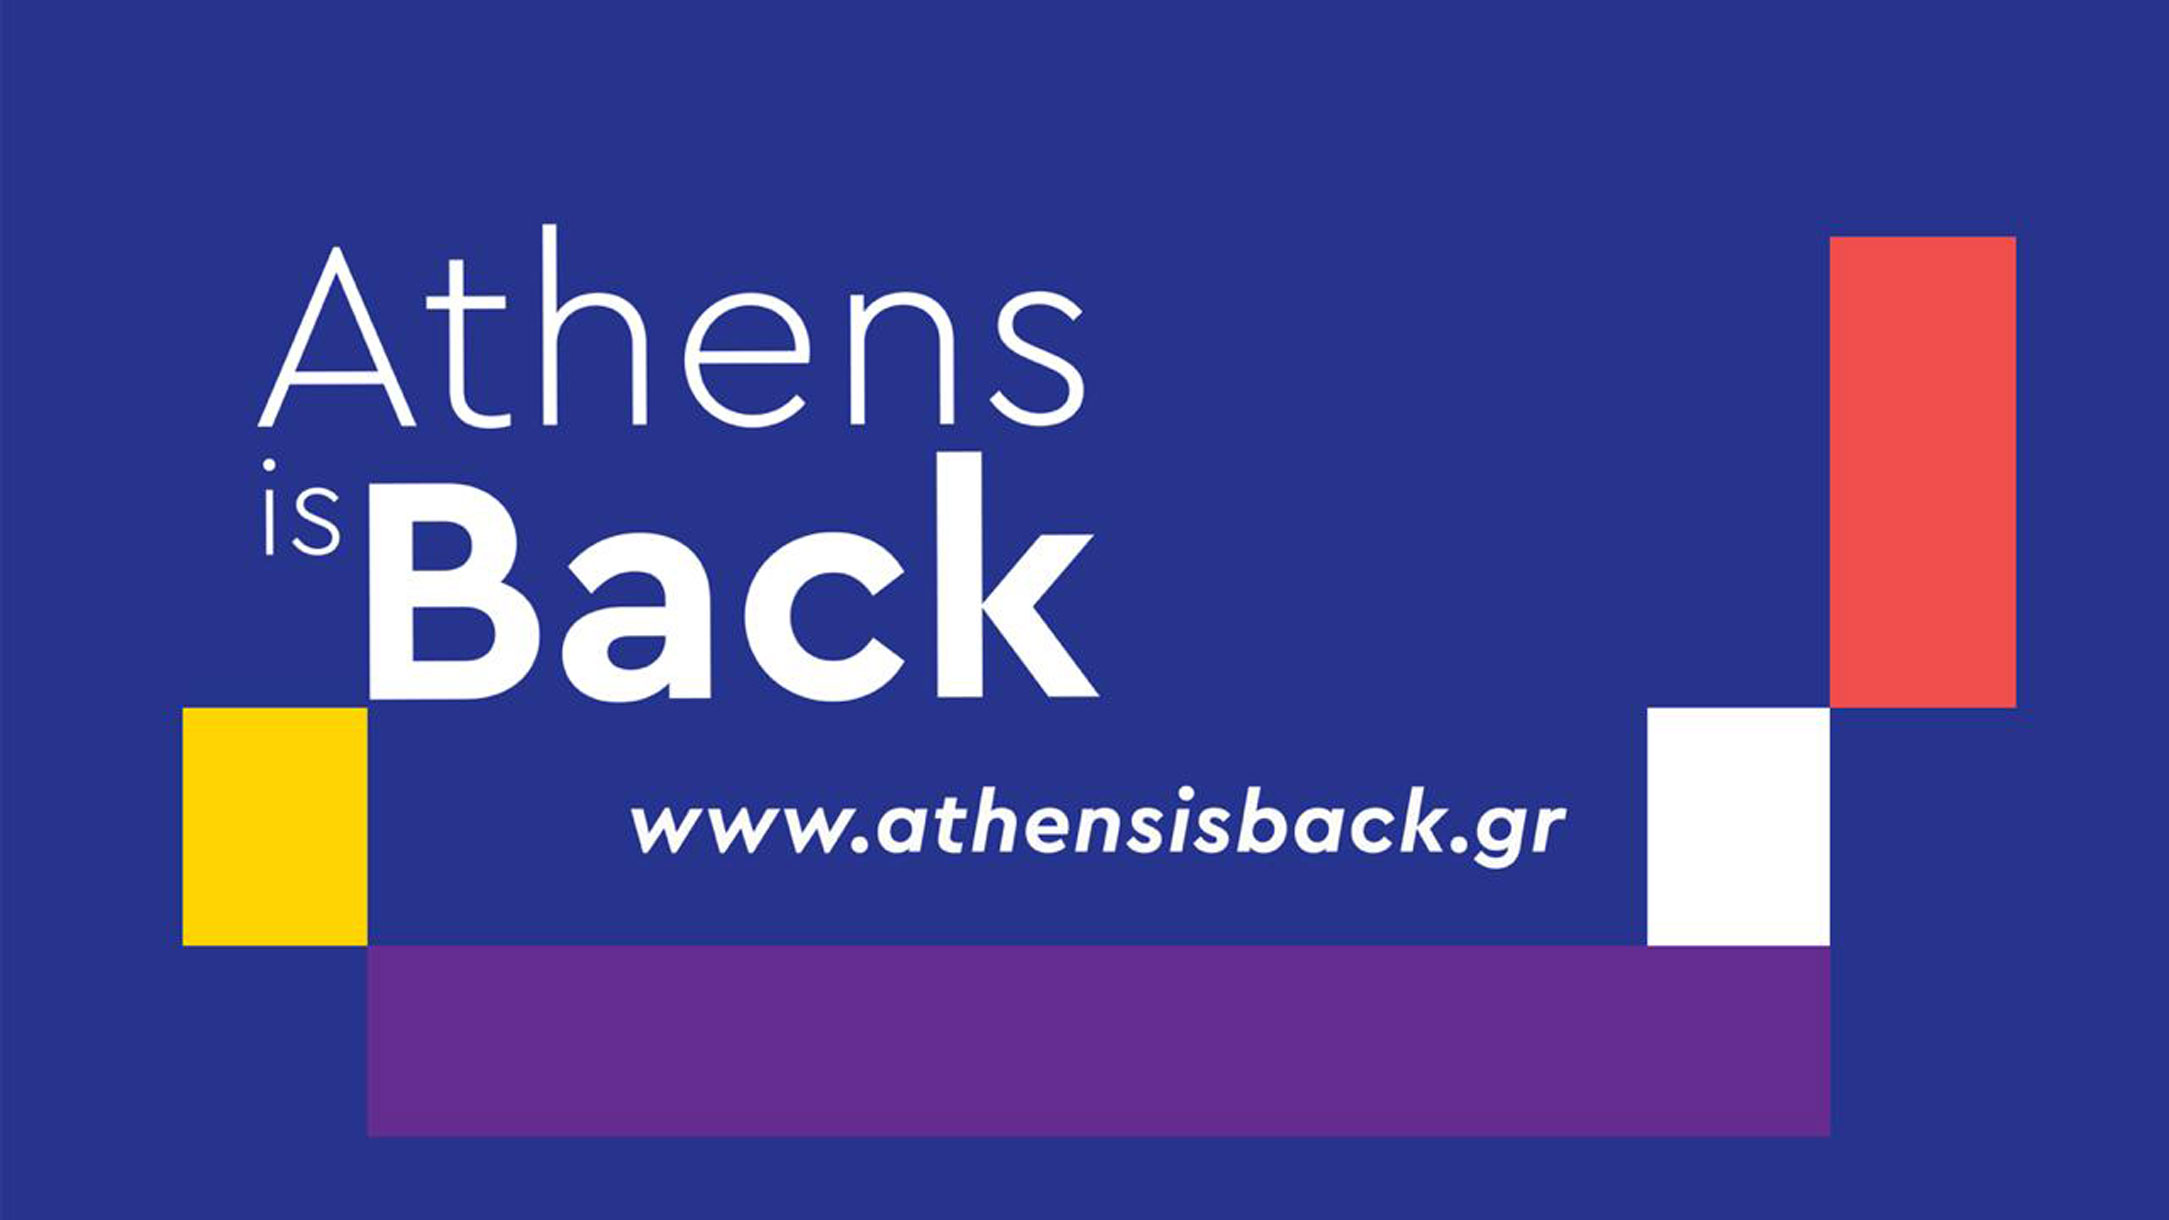 “Athens is Back”: Τι είναι και τι πρέπει να ξέρετε